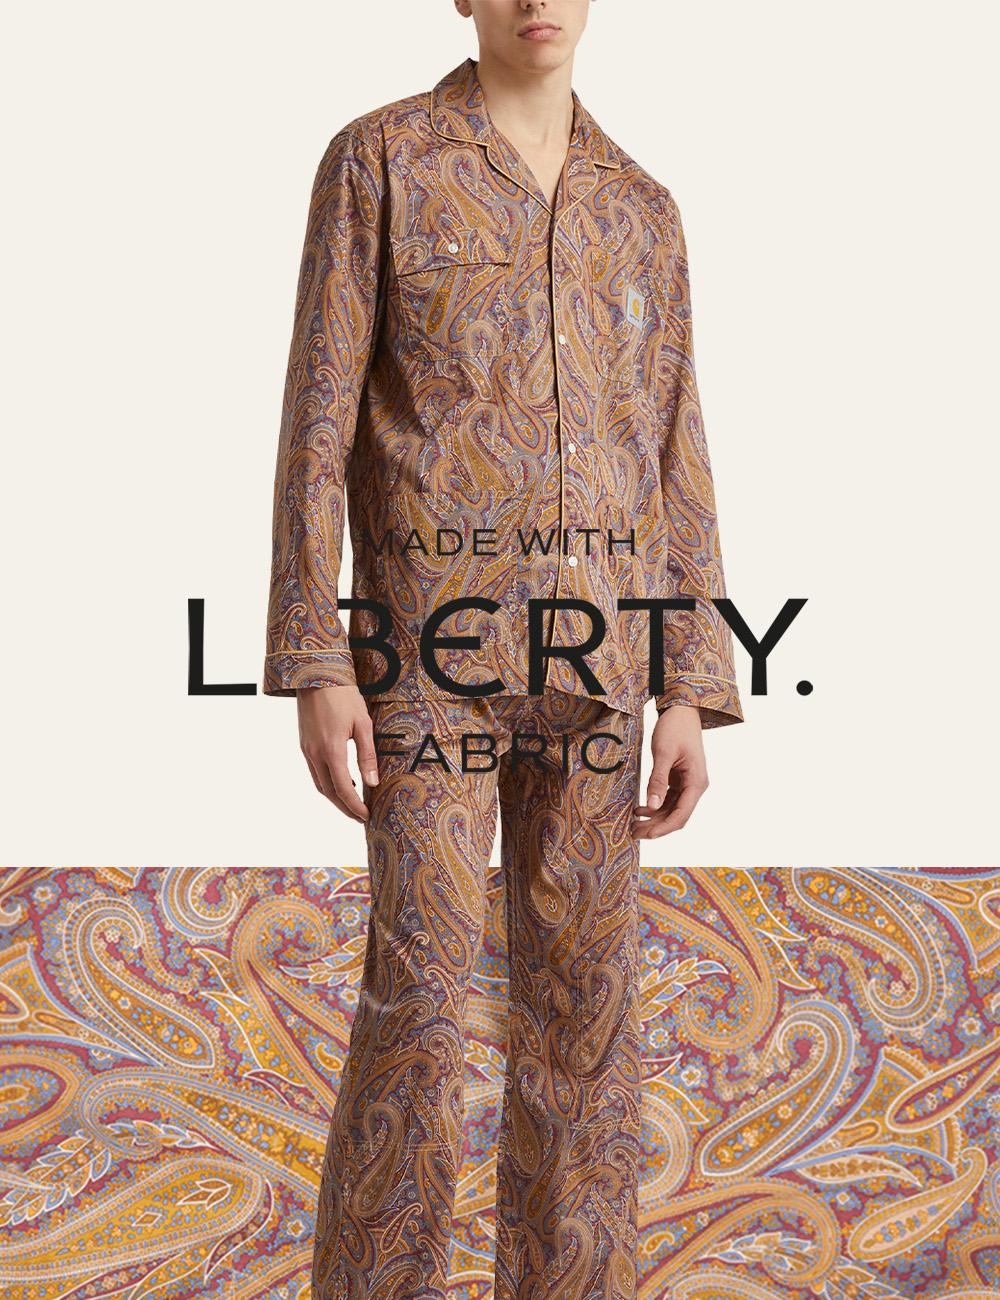 Carhartt WIP's New 'Made with Liberty Fabrics' Collection